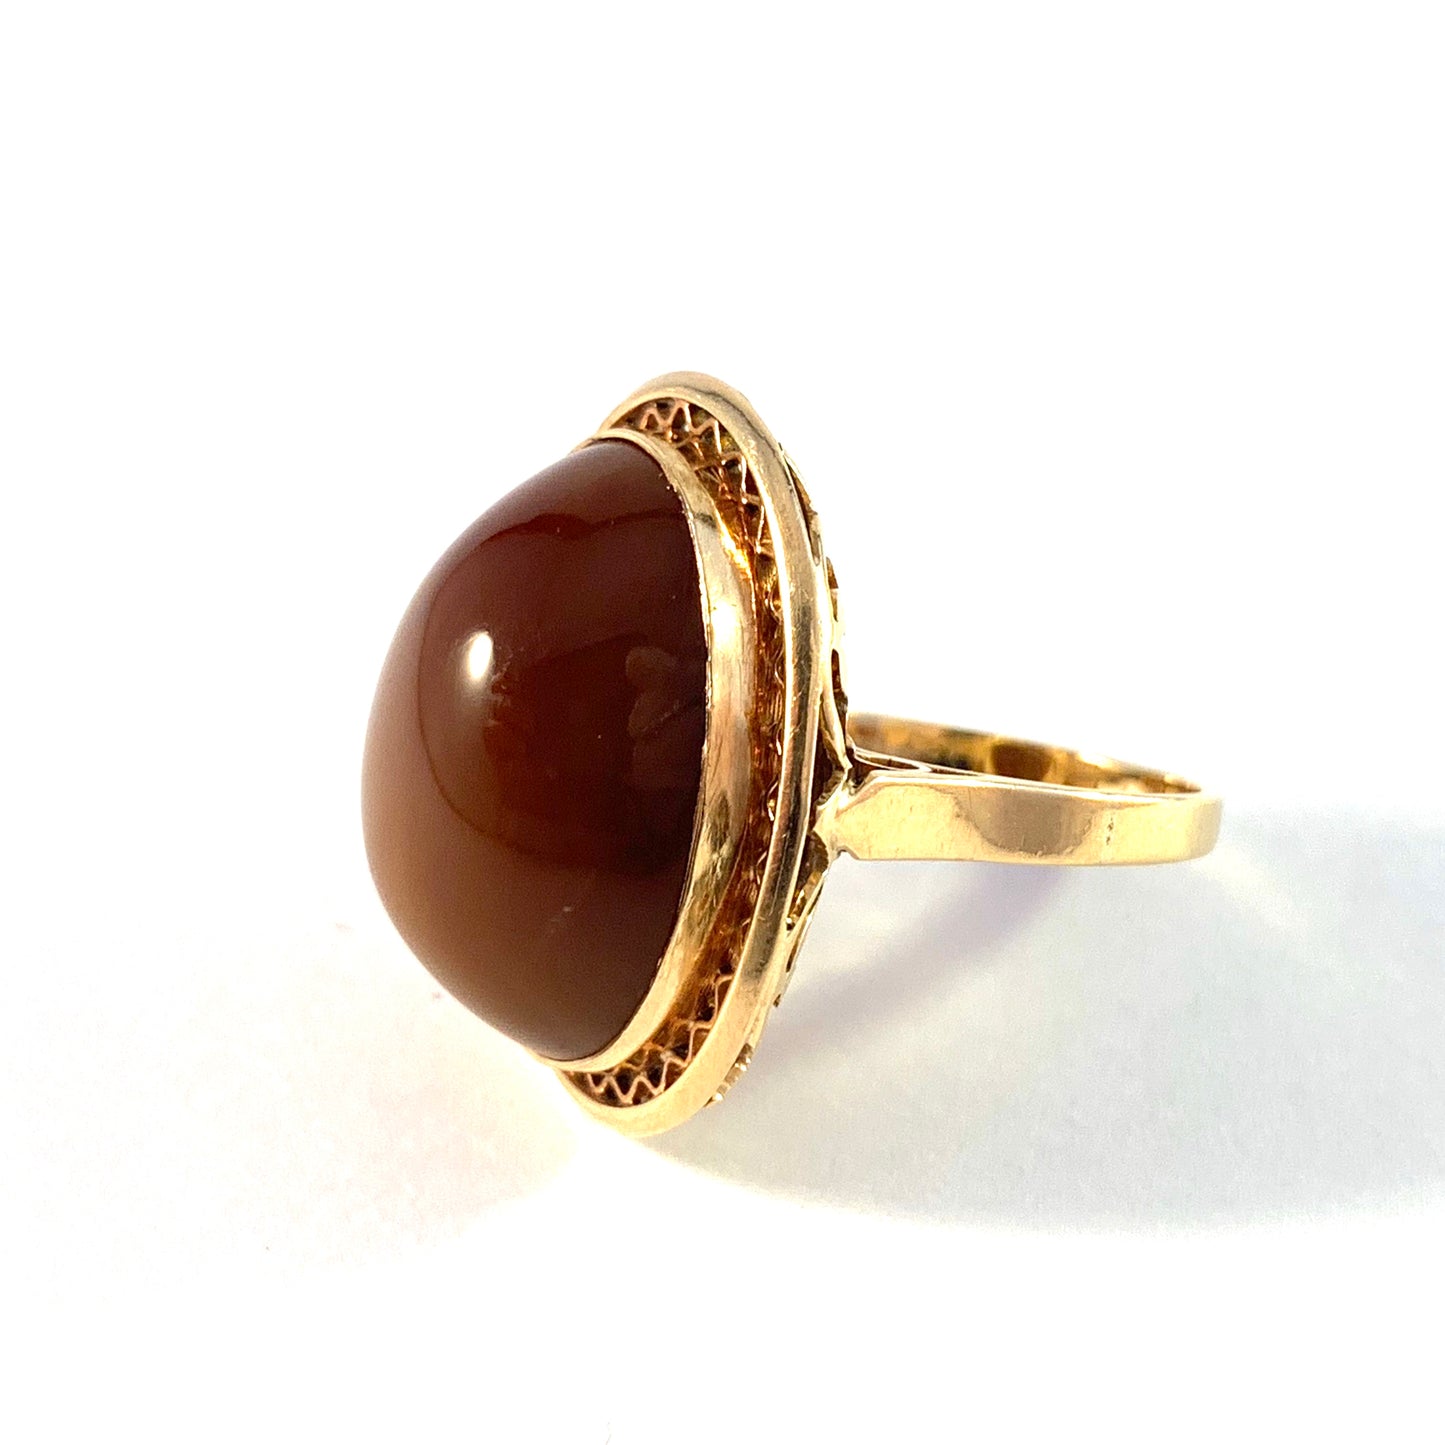 Vintage Mid Century 18k Gold Agate Cocktail Ring.